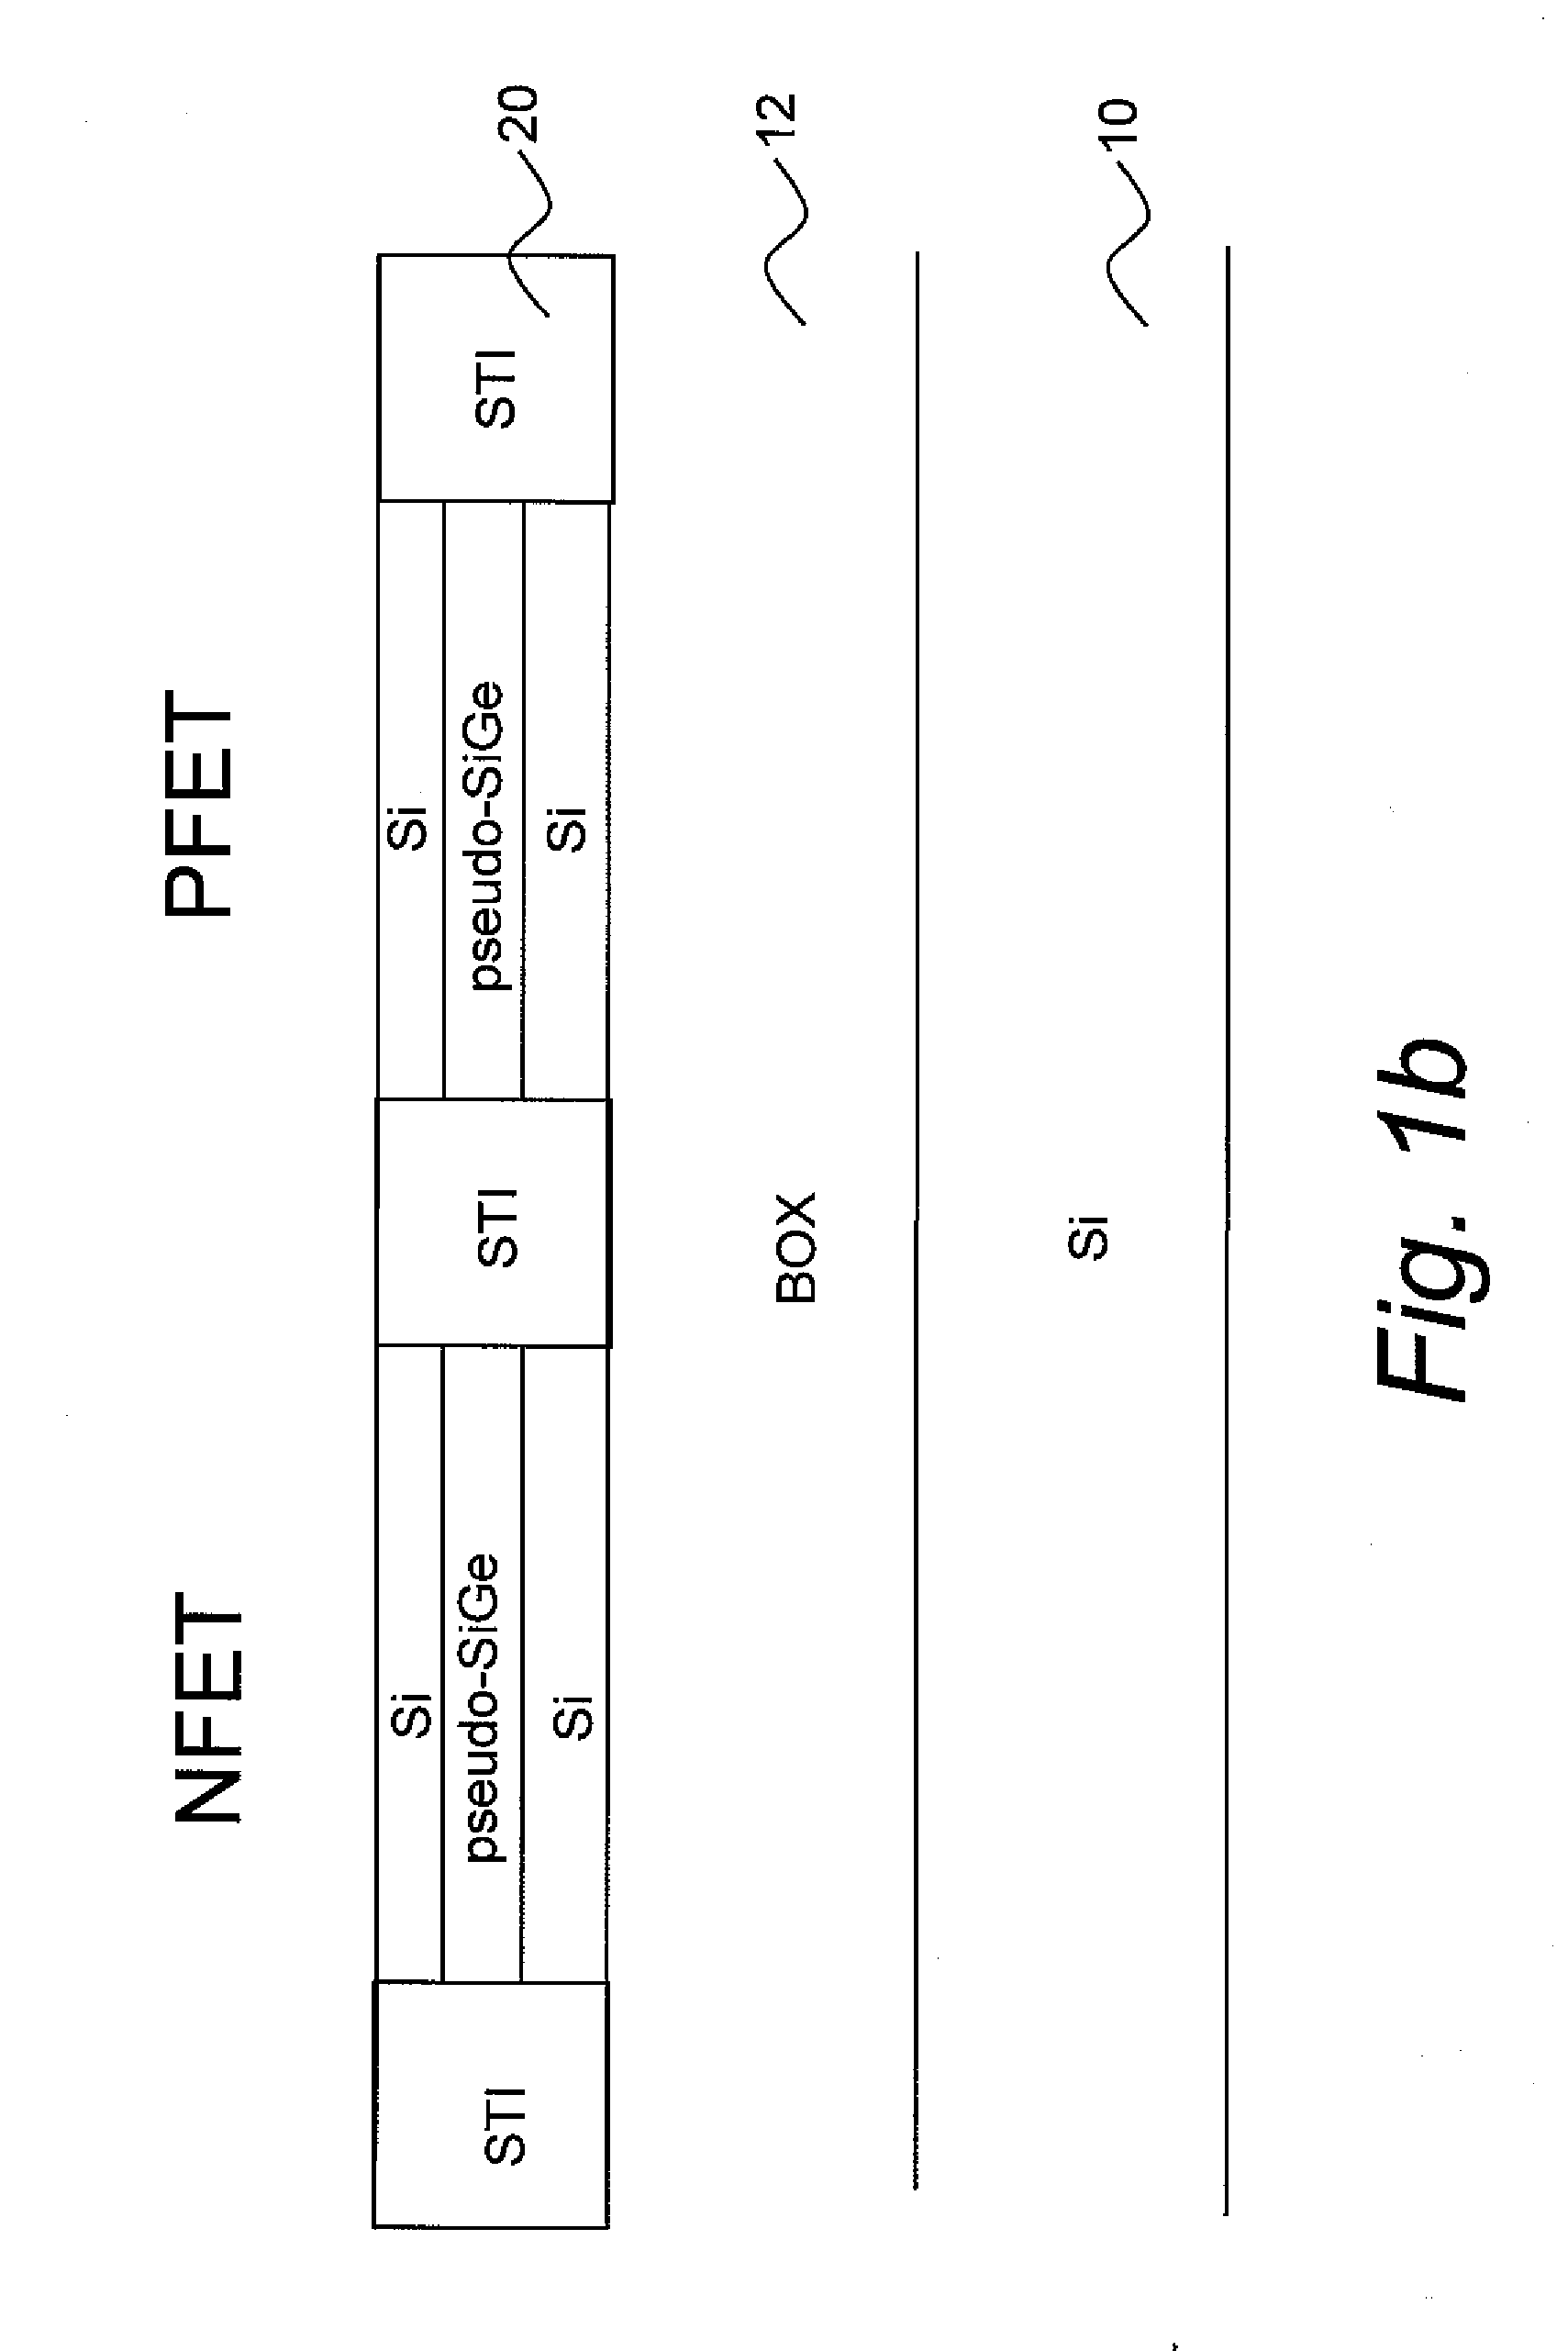 High performance stress-enhance mosfet and method of manufacture